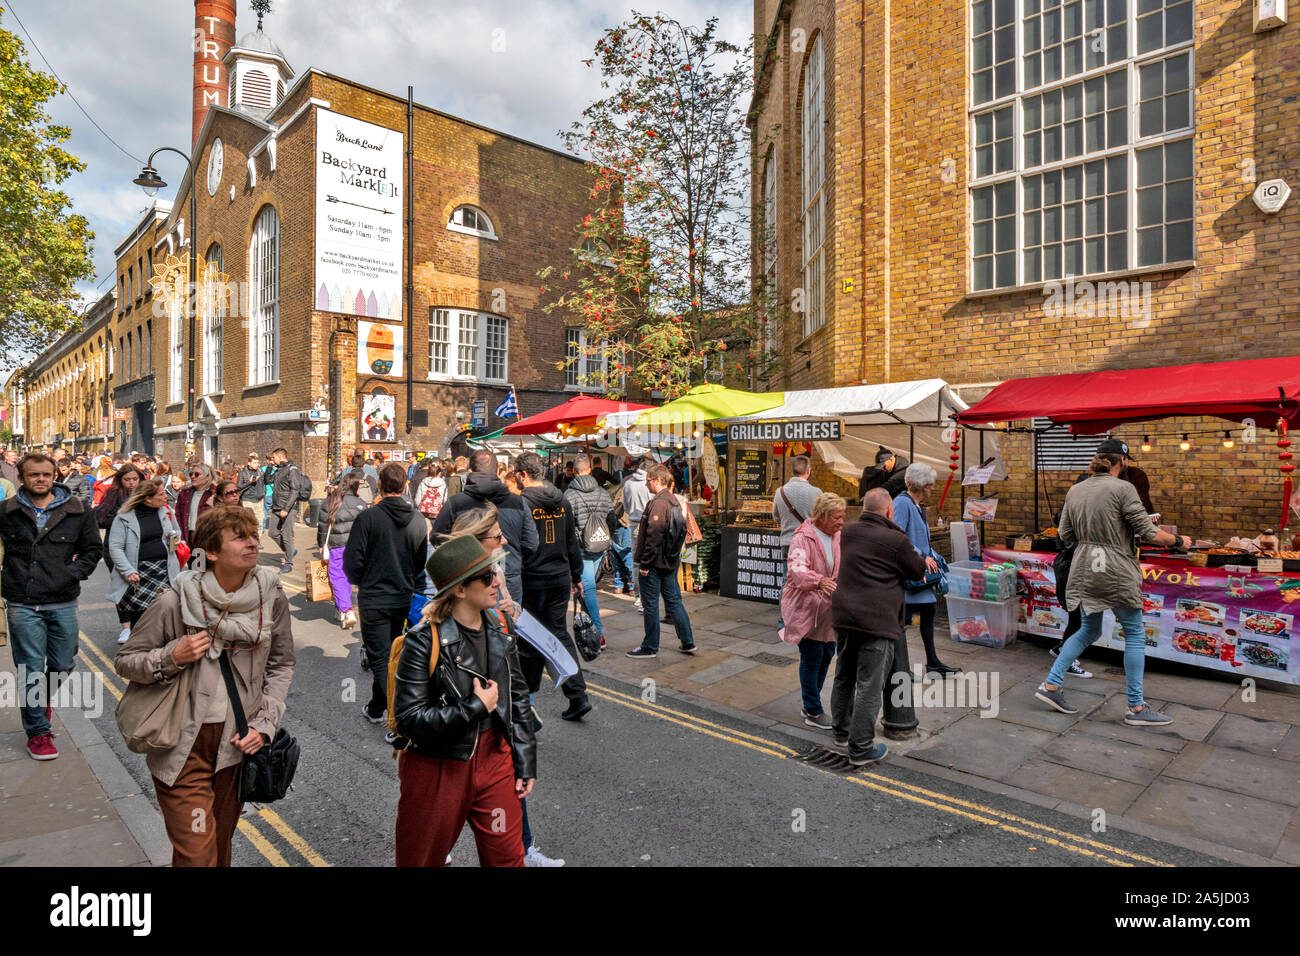 LONDON BRICK LANE CROWDS SHOPPING AND STREET OR FAST FOOD FOR SALE Stock Photo